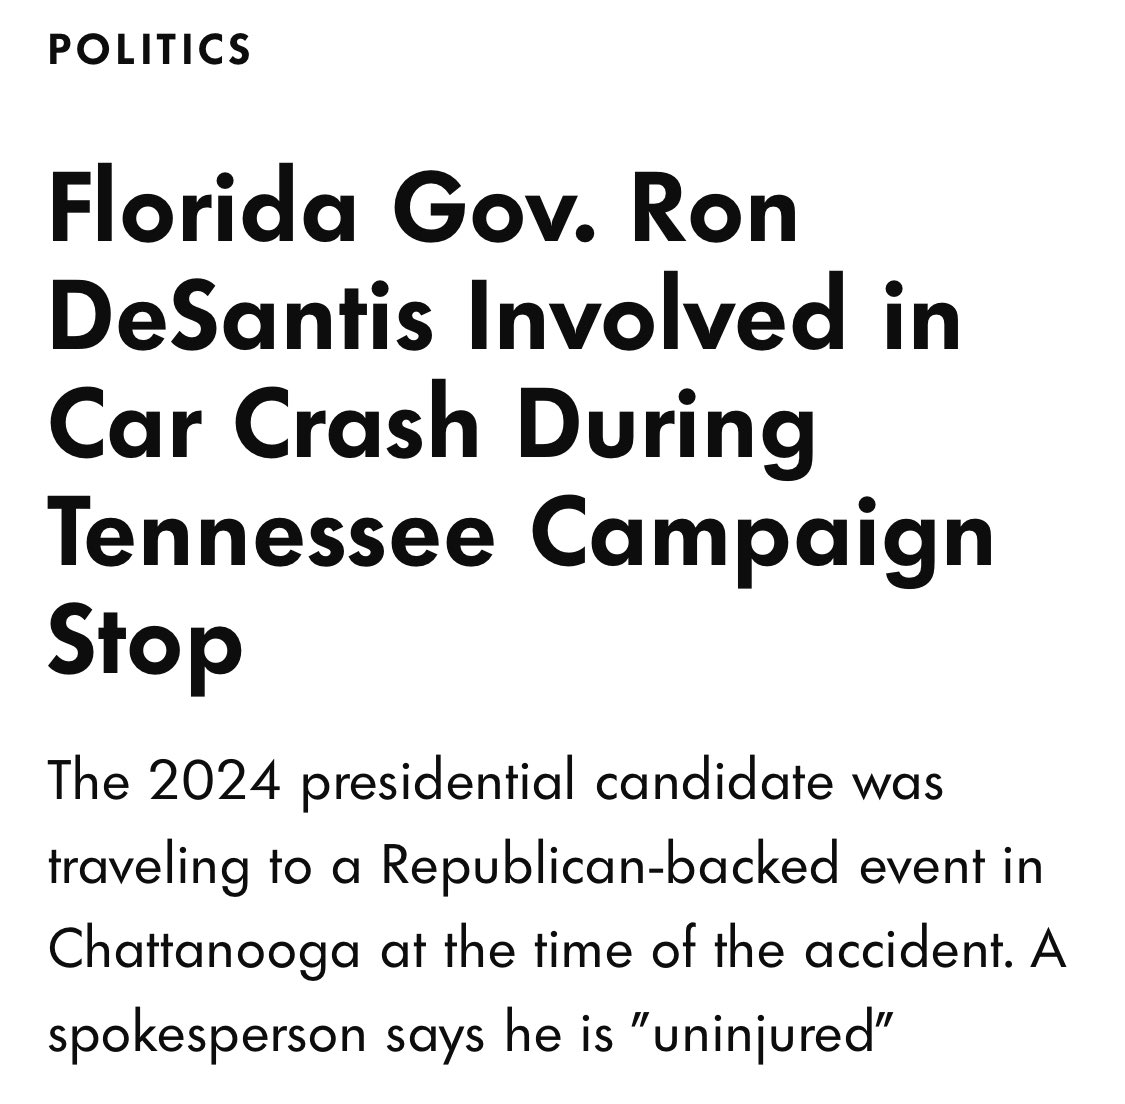 When I saw “DeSantis” and “car crash” in the same sentence, I just assumed we were talking about how well his campaign is going.